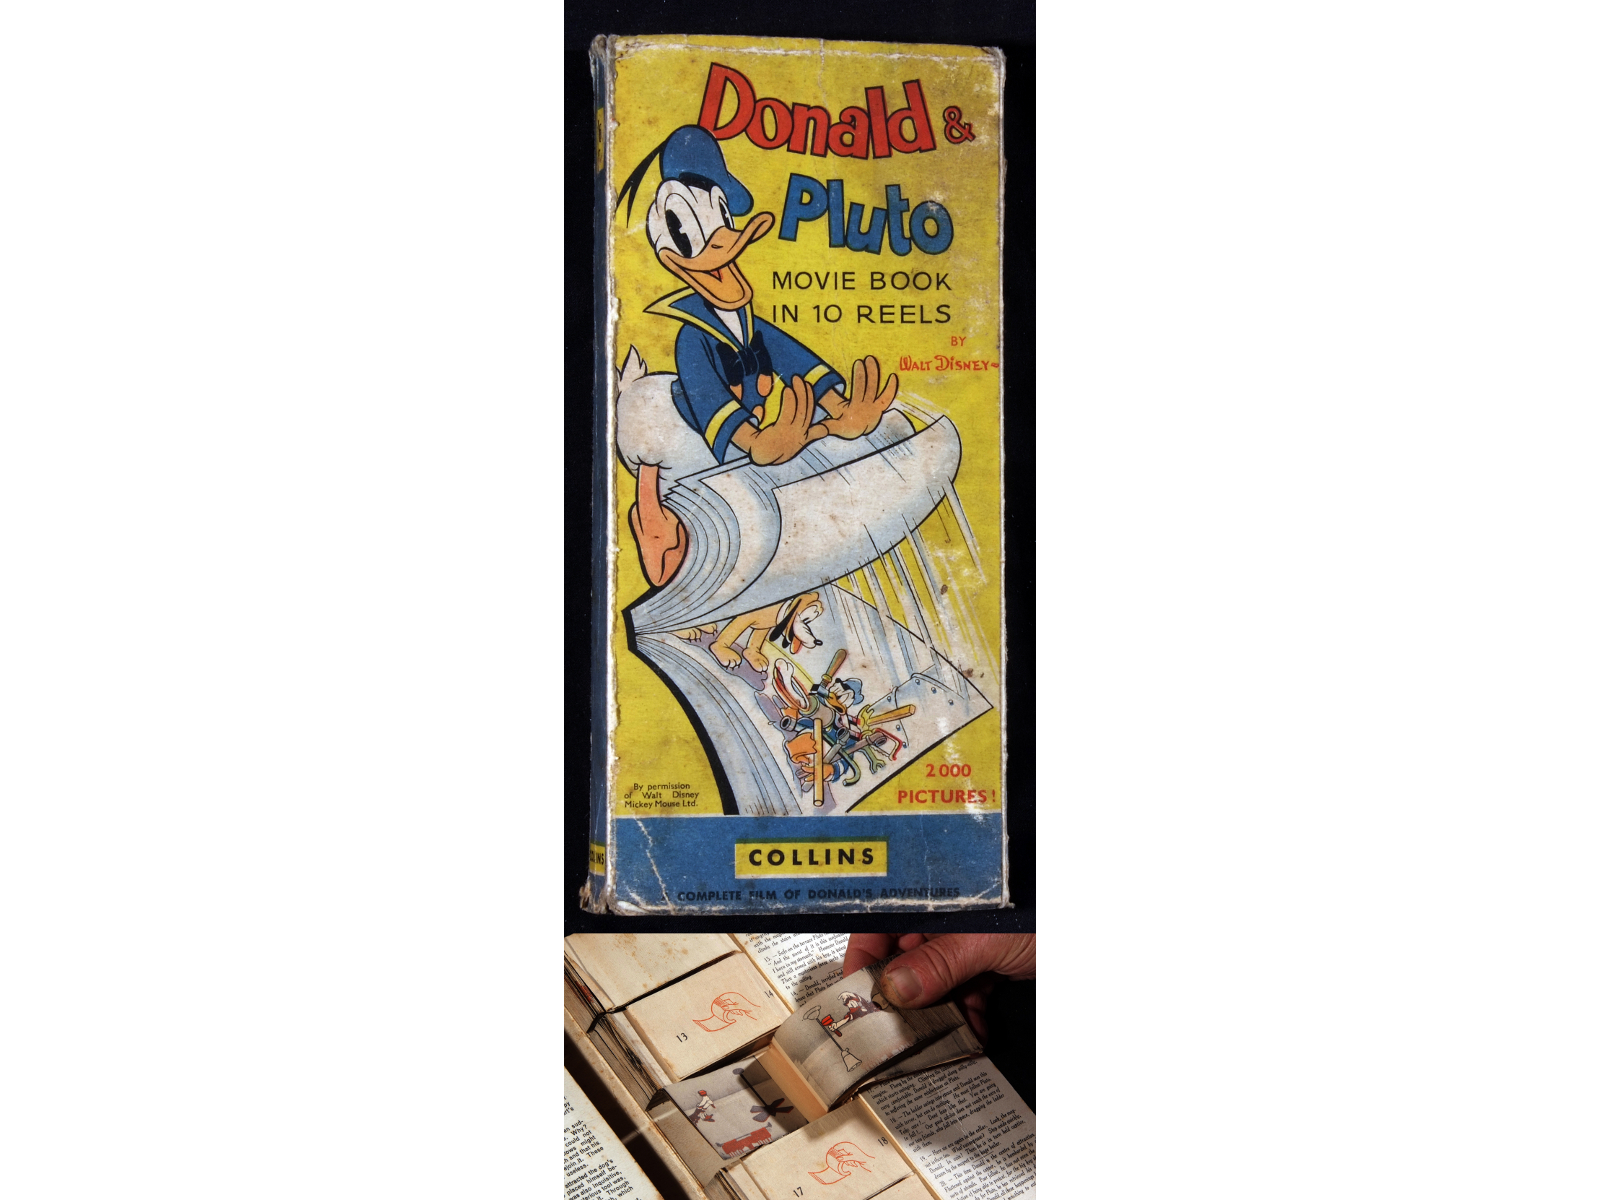 WALT DISNEY: DONALD AND PLUTO MOVIE BOOK, L, Collins circa 1939, 10 double-sided flicker books in 1,